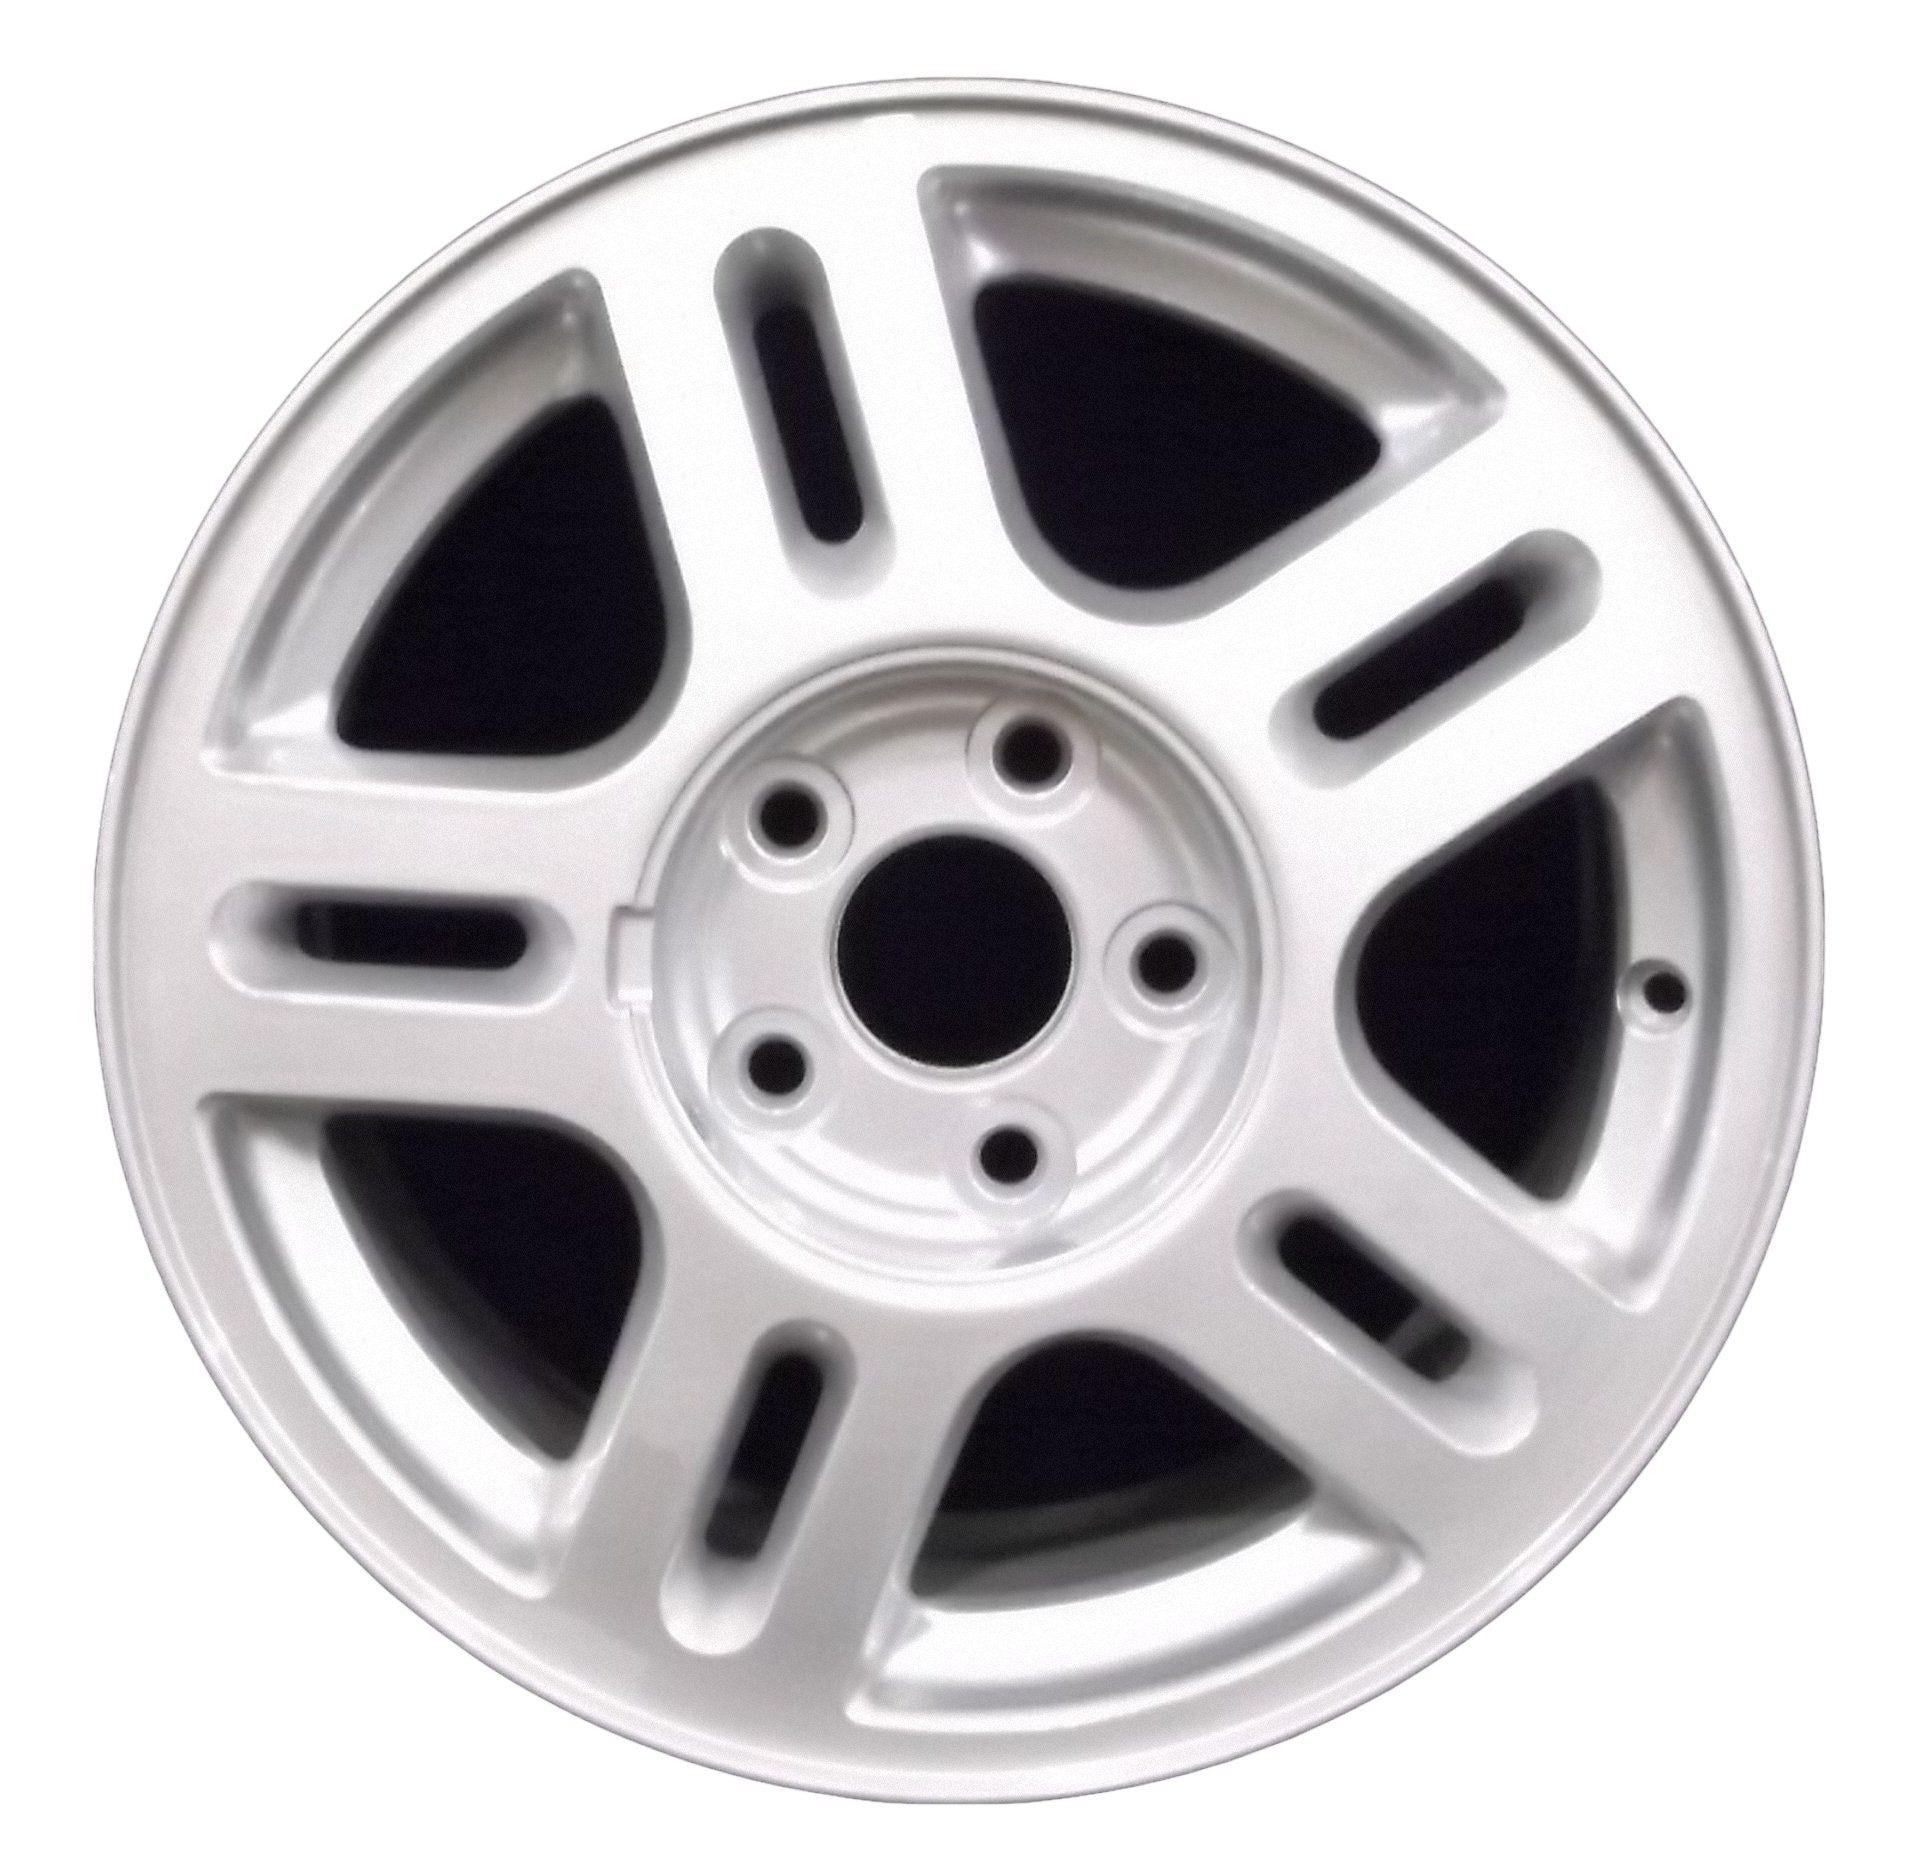 Ford Freestar  2004, 2005, 2006, 2007 Factory OEM Car Wheel Size 16x6.5 Alloy WAO.3544.PS02.FF